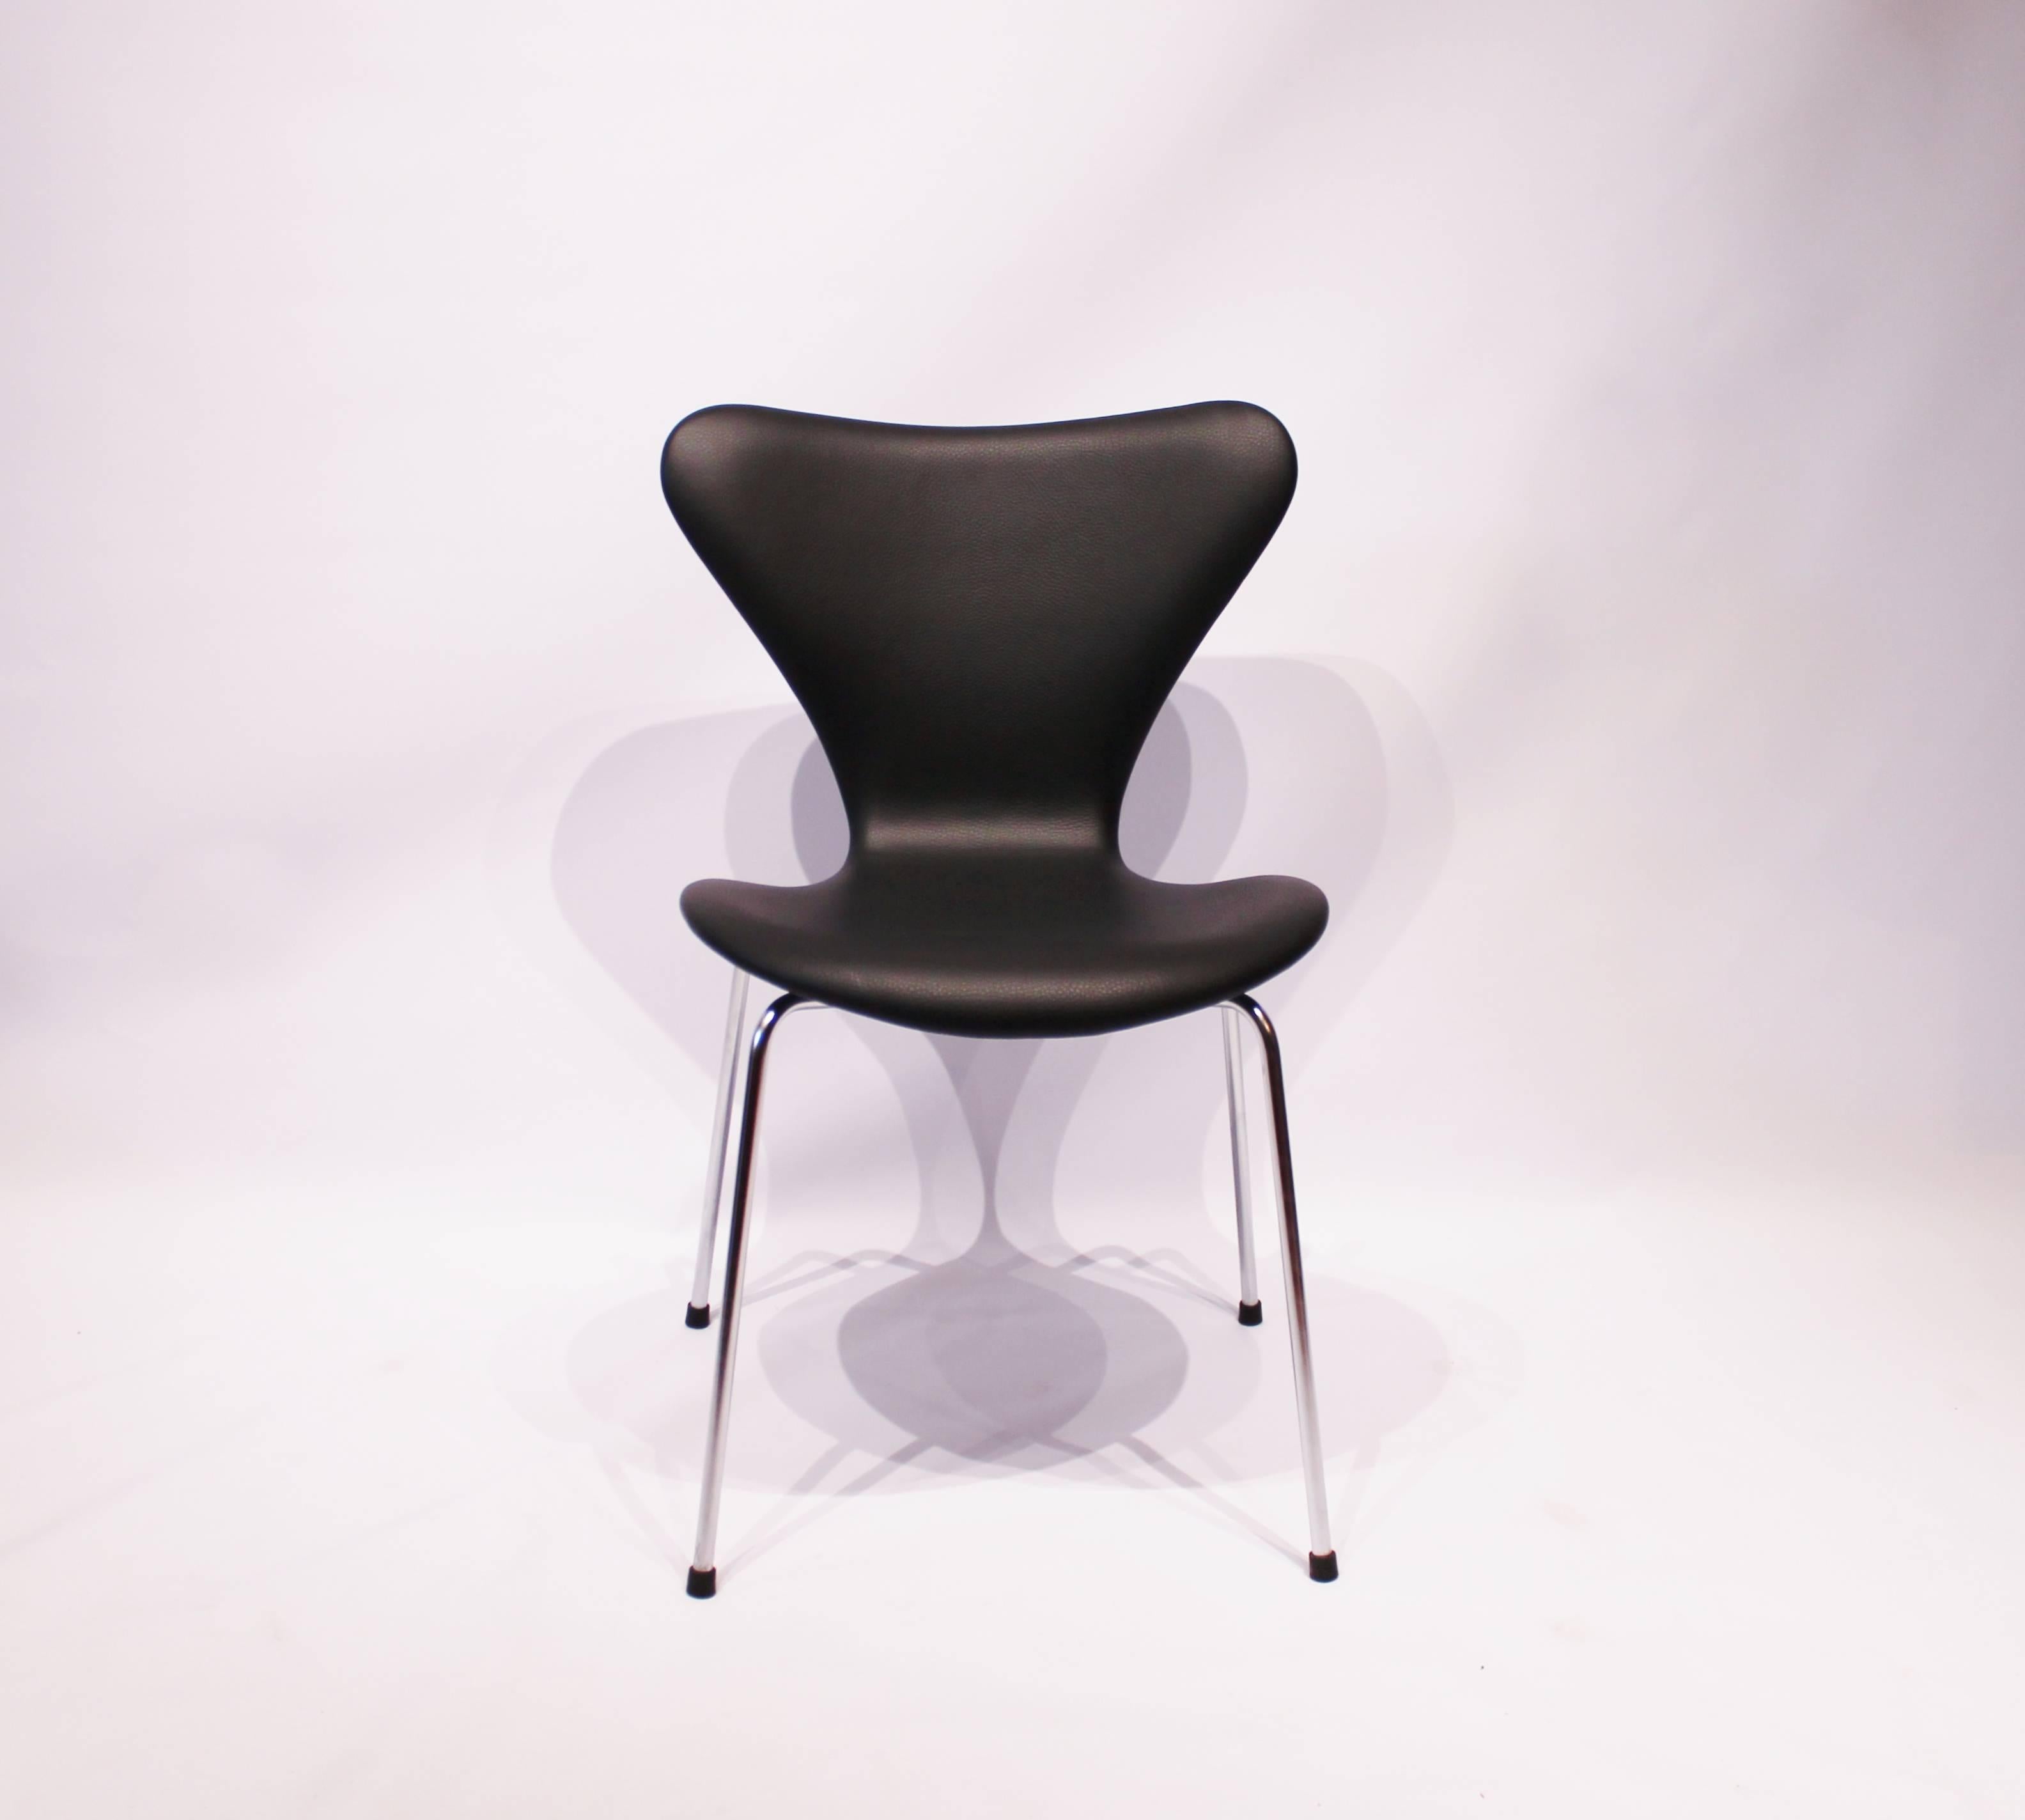 A set of four Seven chairs, model 3107, designed by Arne Jacobsen and manufactured by Fritz Hansen in the 1980s. The chairs are upholstered in black classic leather. We can upholster more chairs if needed, in any leather wanted.